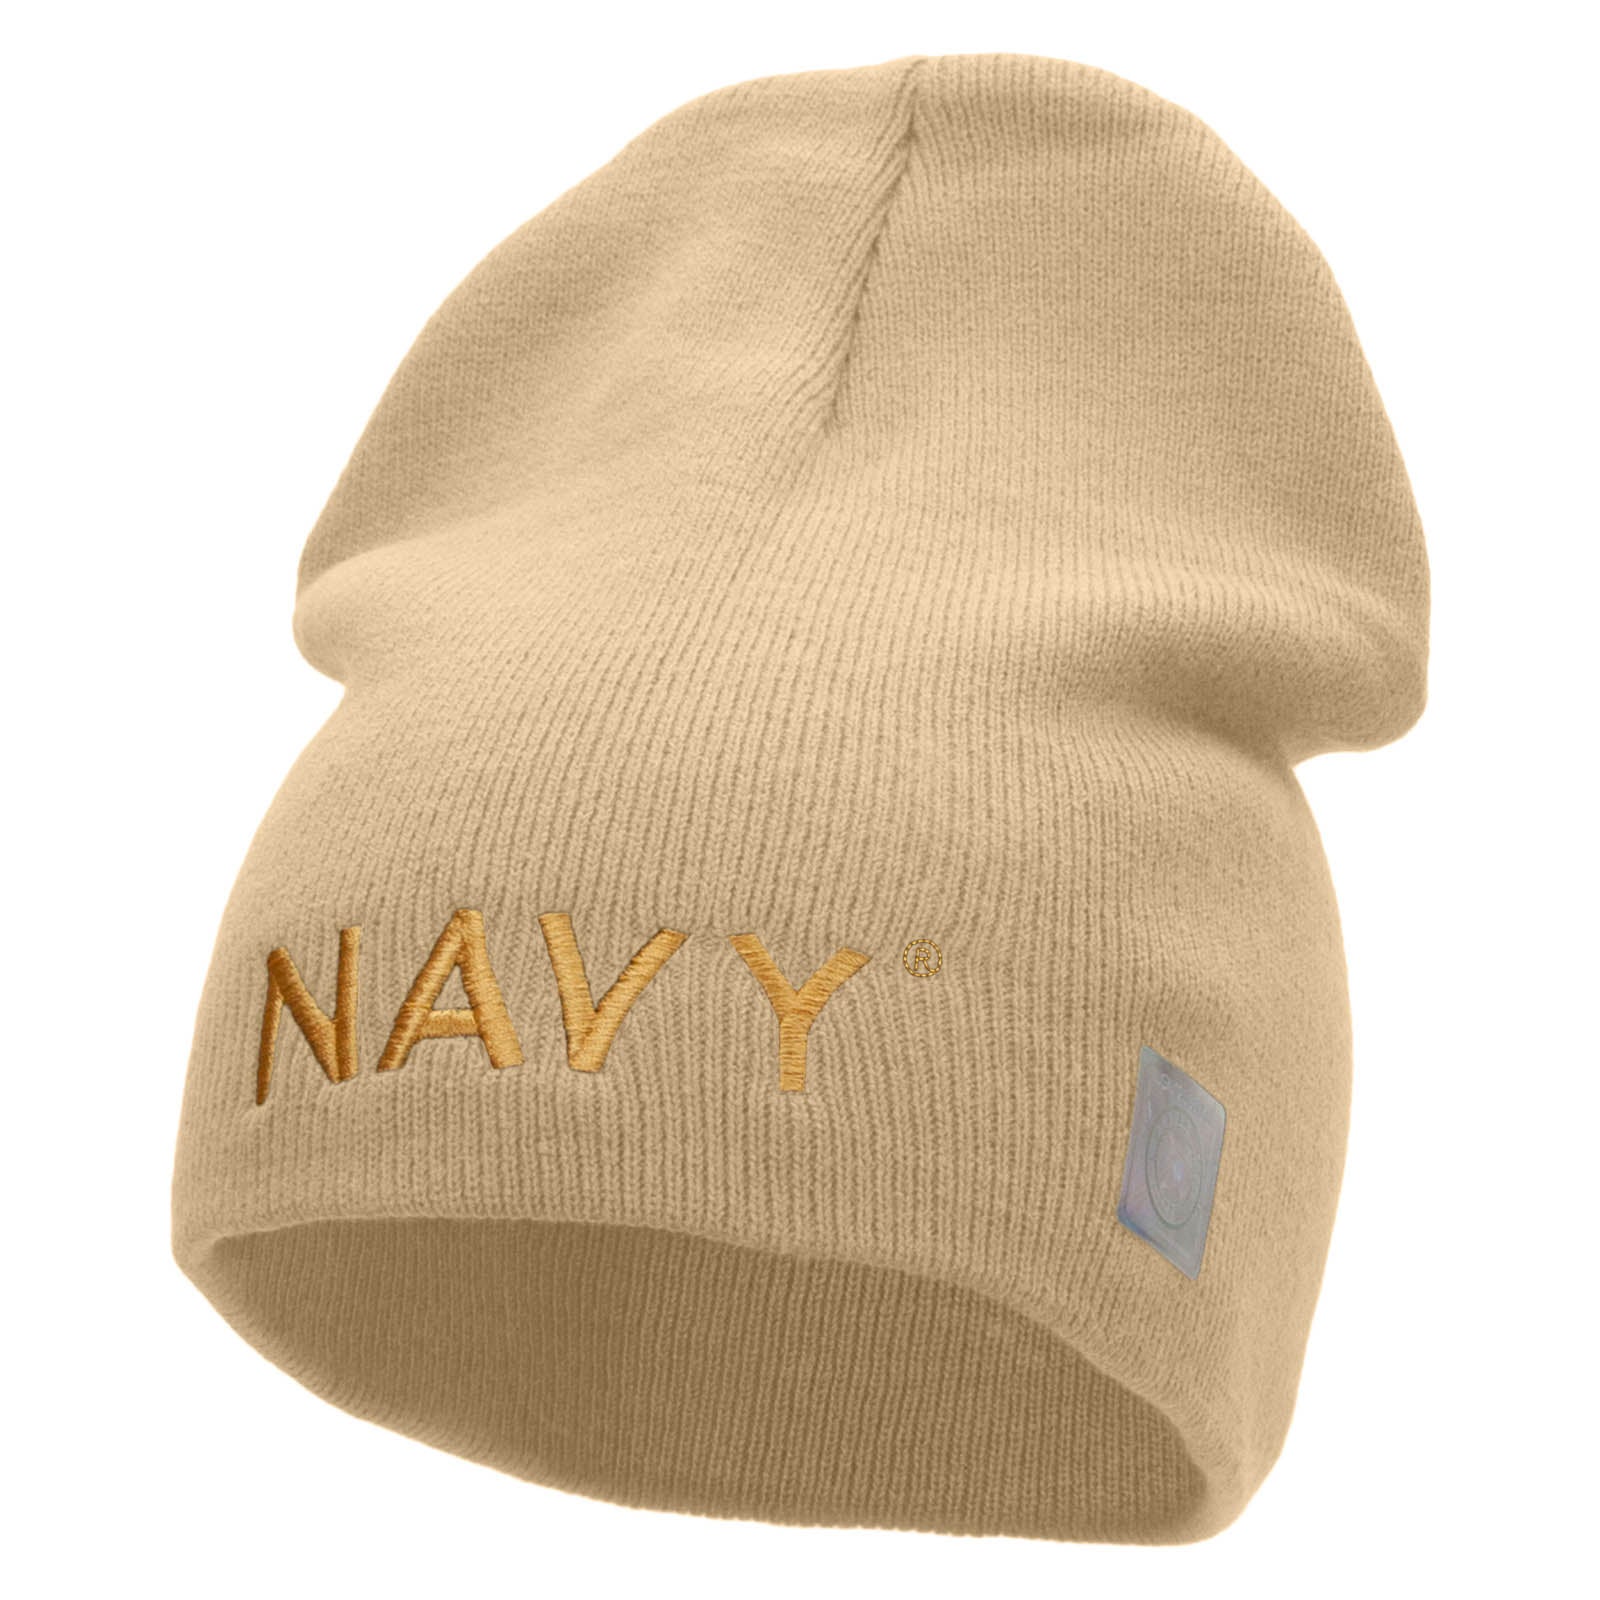 Licensed Navy Military Embroidered Short Beanie Made in USA - Stone OSFM